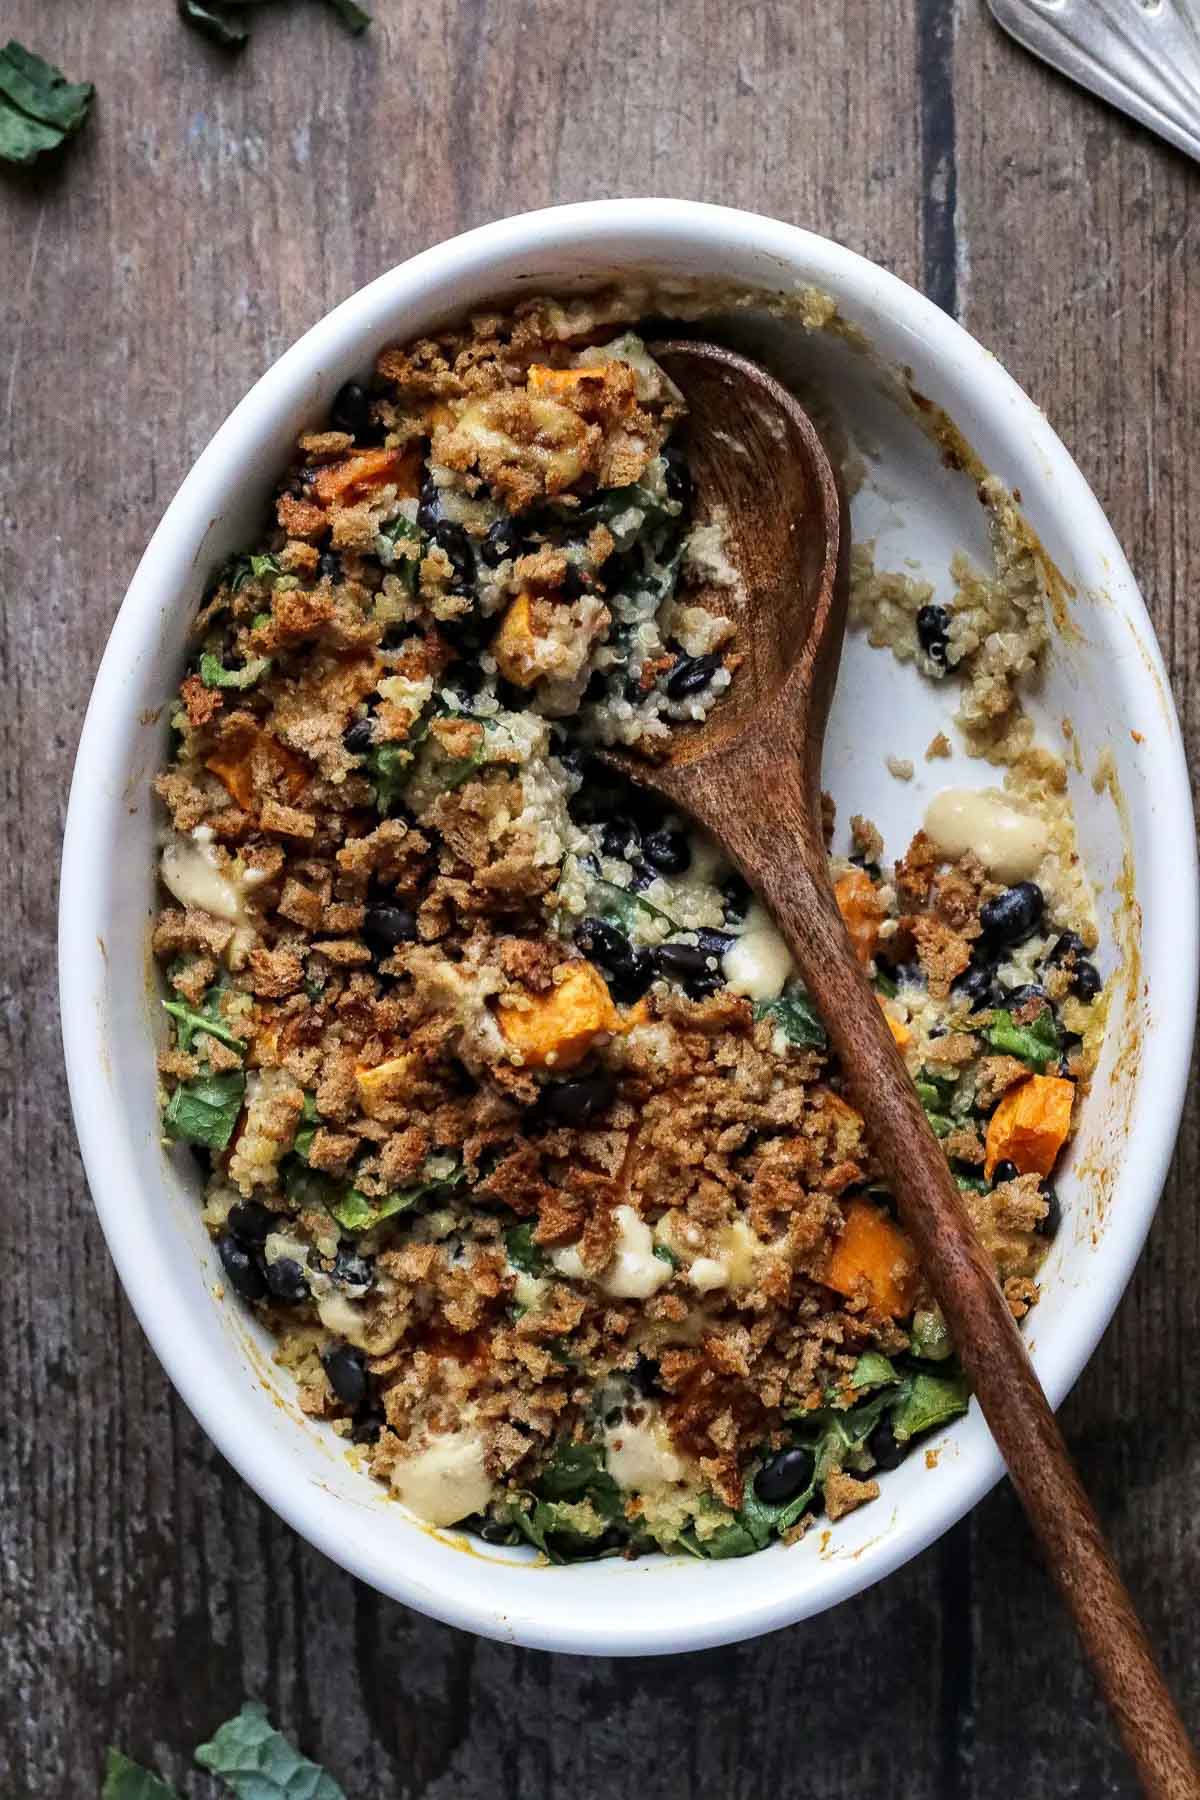 Sweet potato, black beans, kale and quinoa casserole in an oval dish with a wooden spoon in it.